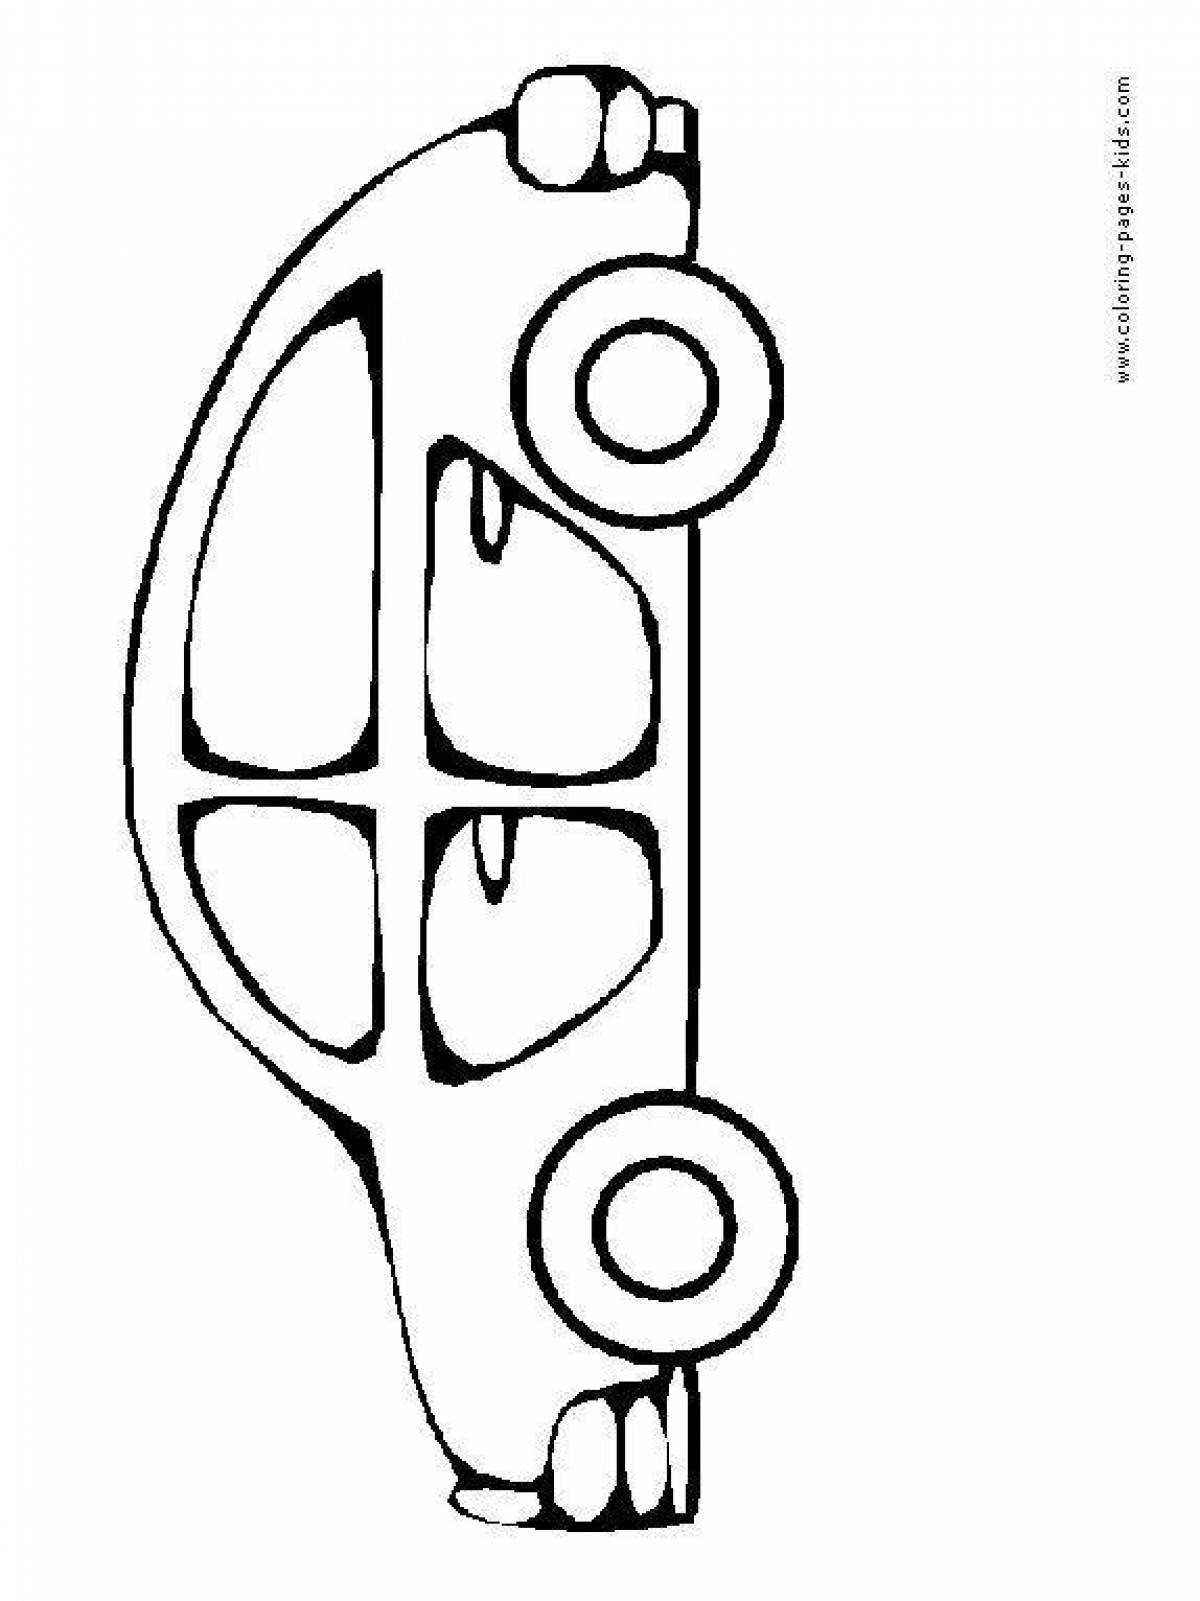 Sparkling traffic light coloring page